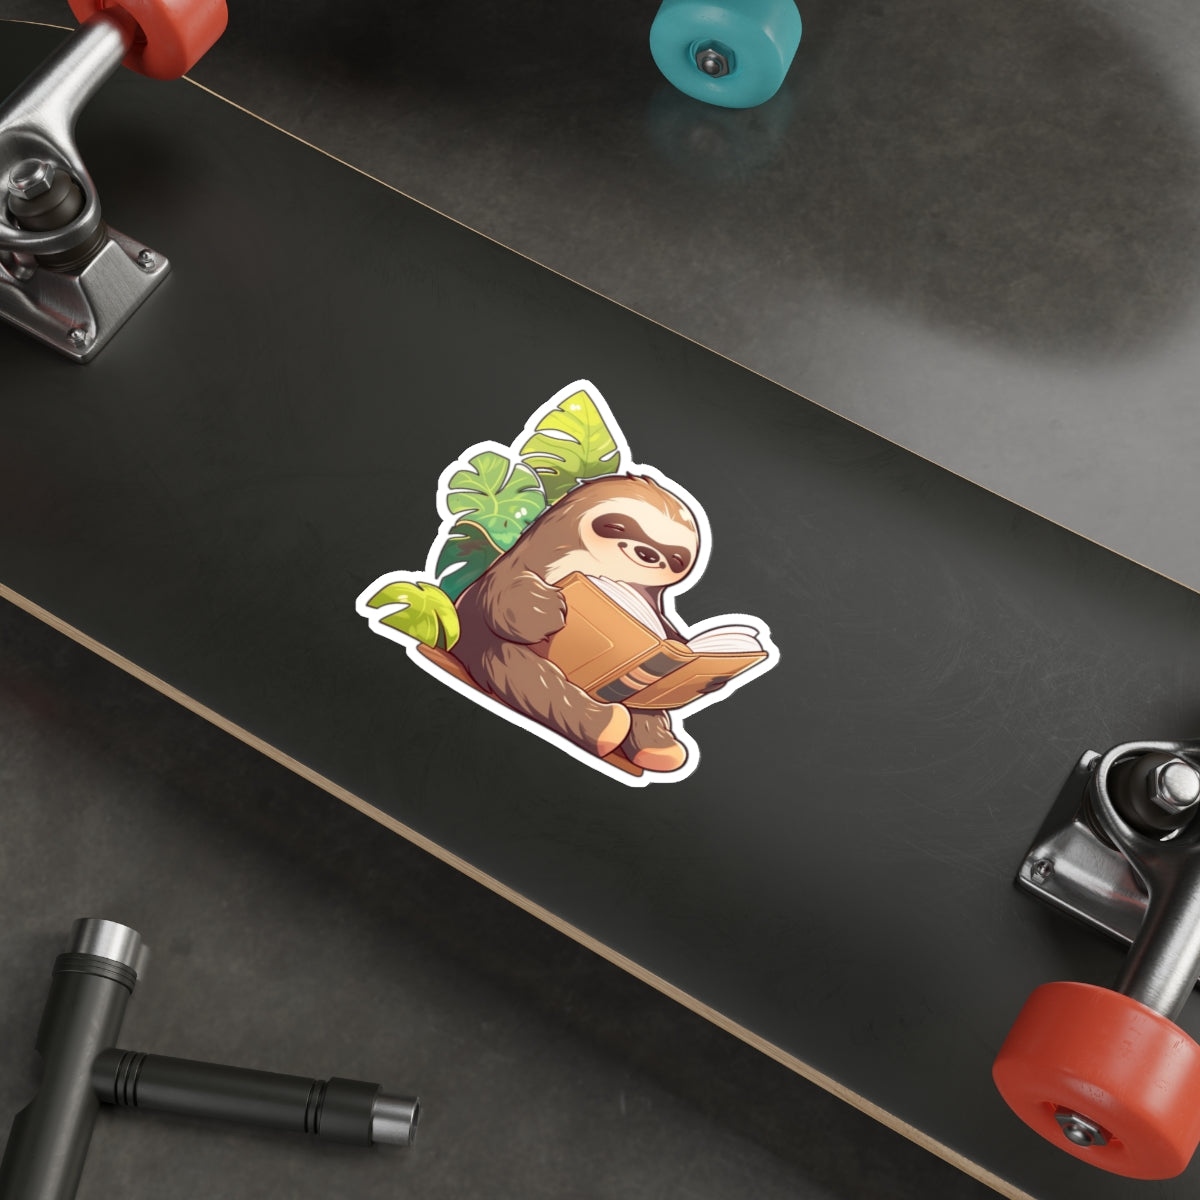 Sloth Sticker + $10 toward new features at Shepherd.com